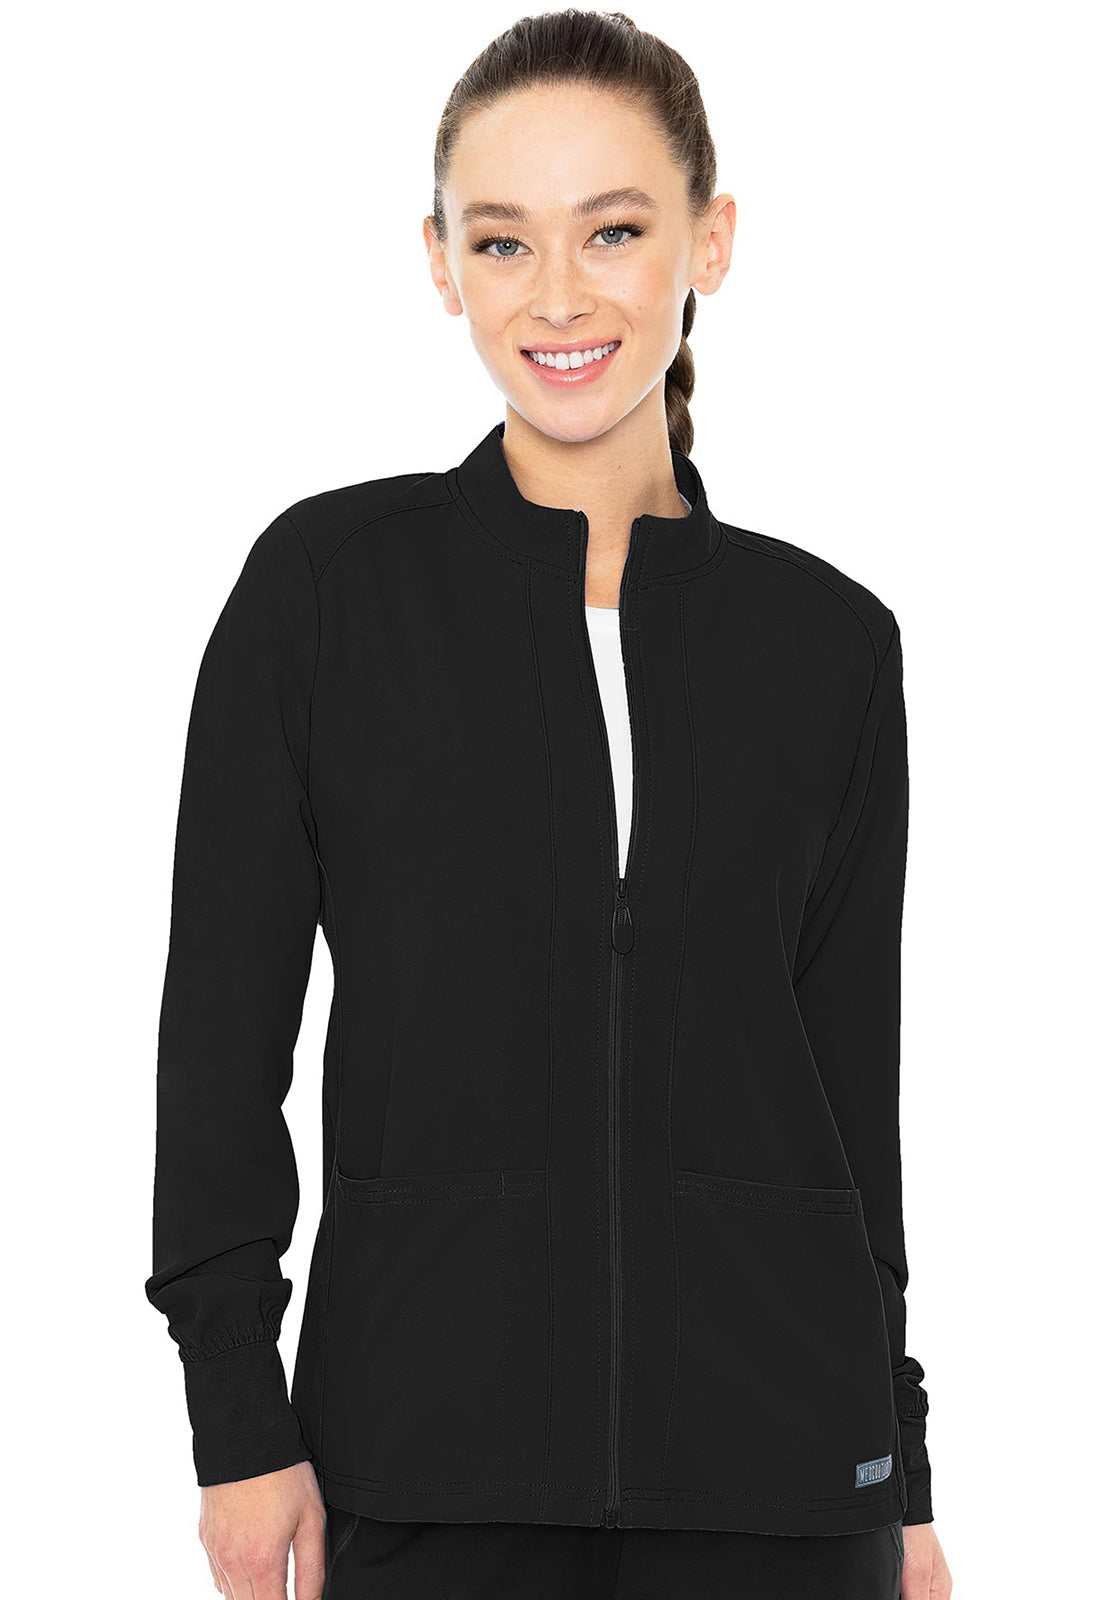 Med Couture Insight Zip Front Warm-Up With Shoulder Yokes Jacket